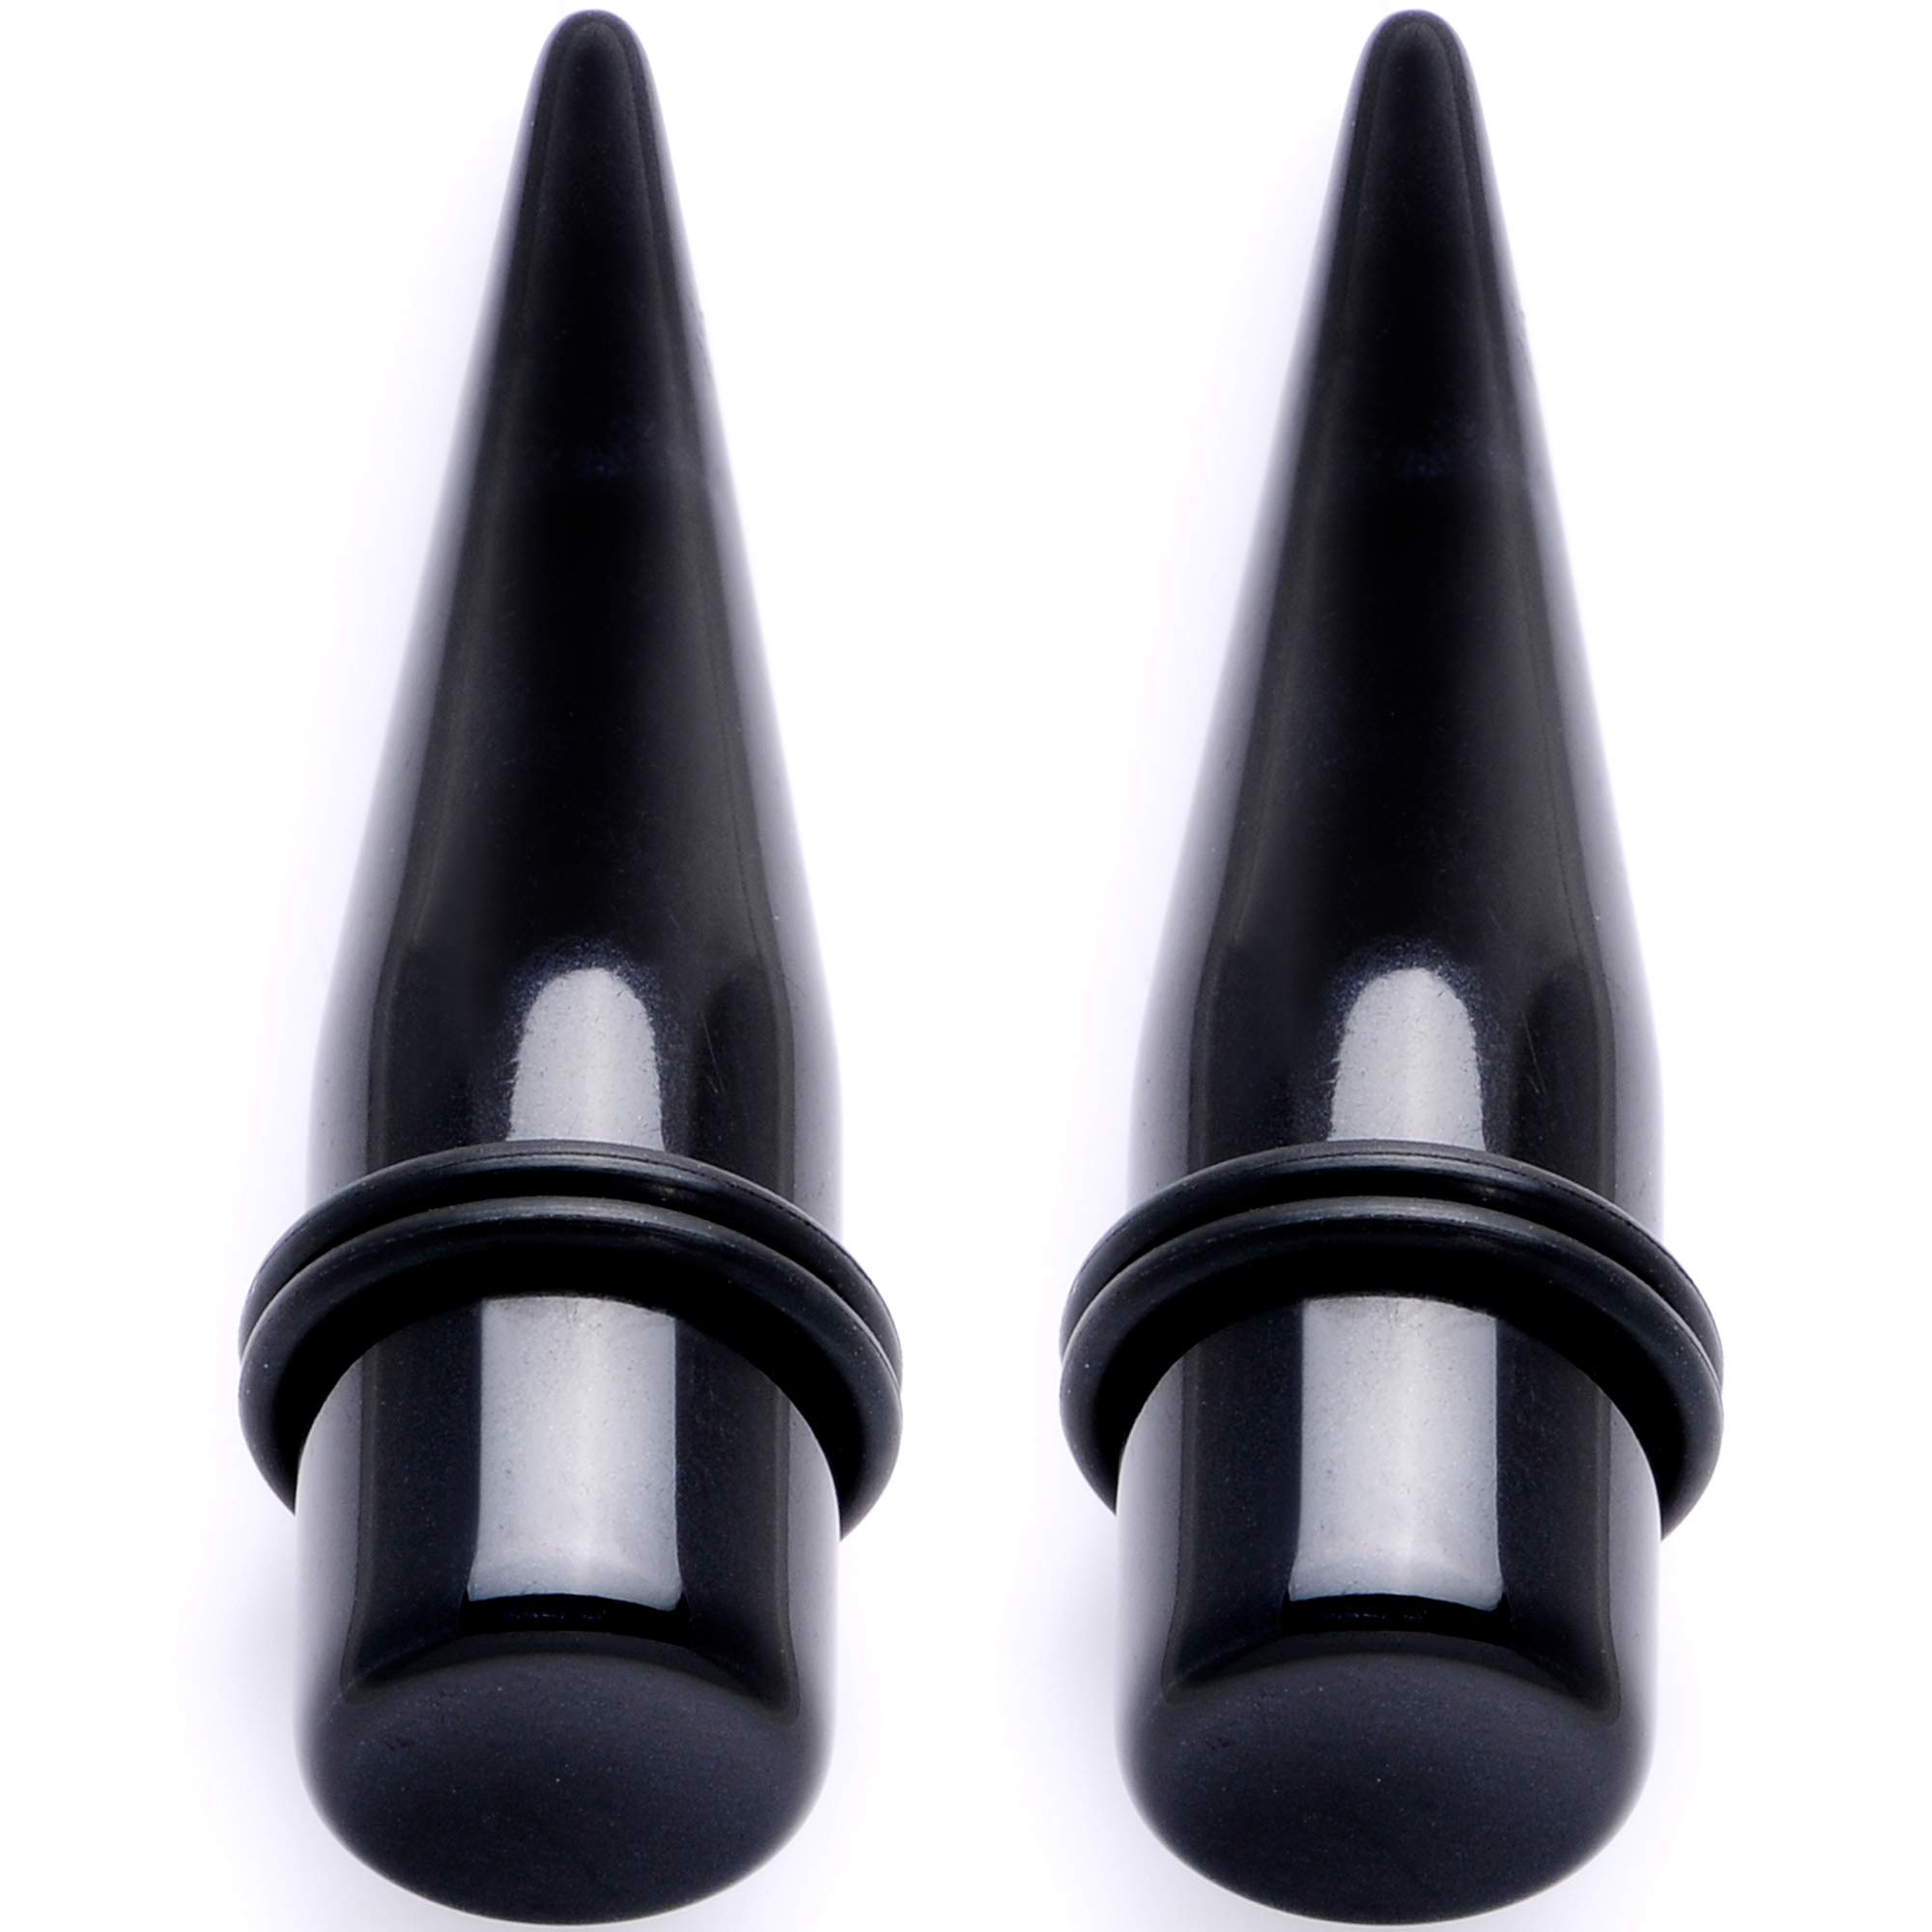 Body Candy Unisex Ear Gauges Stretching Kit Straight Tapers for Stretched Ears Black Acrylic Taper Set